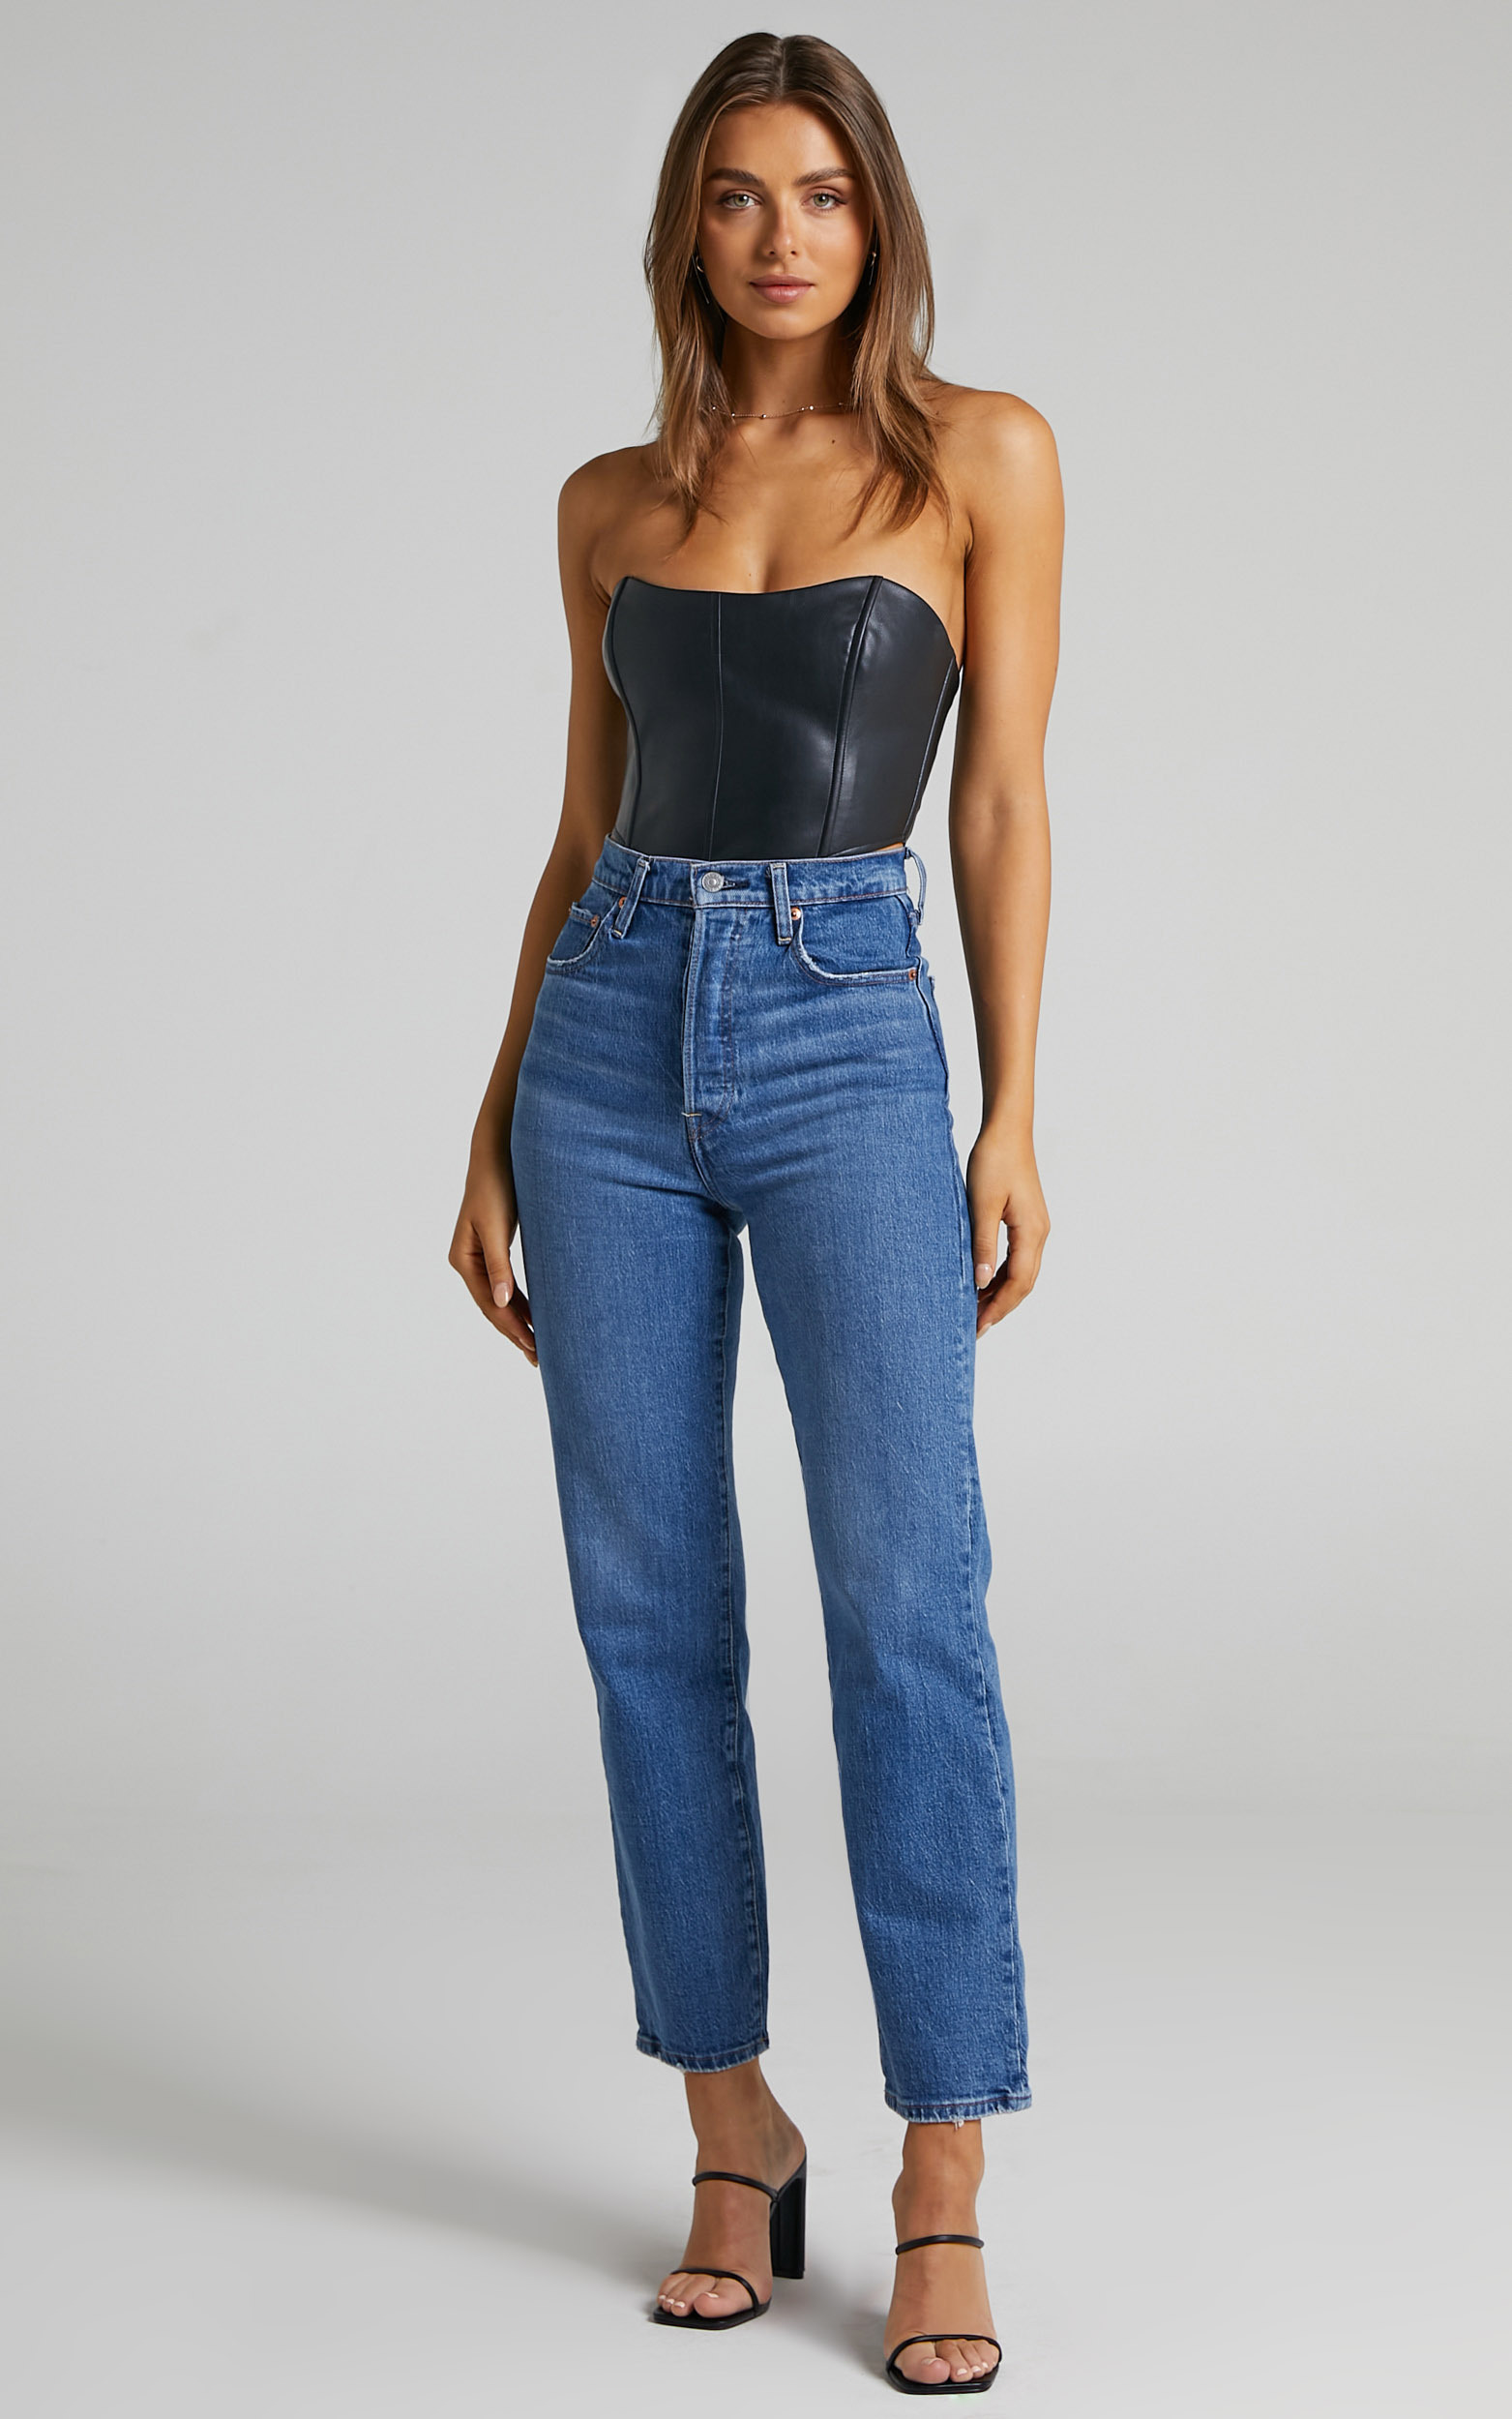 Goedkeuring scheuren Abstractie Levi's - High Waisted Ribcage Straight Ankle Jeans in Jazz Jive Together |  Showpo USA